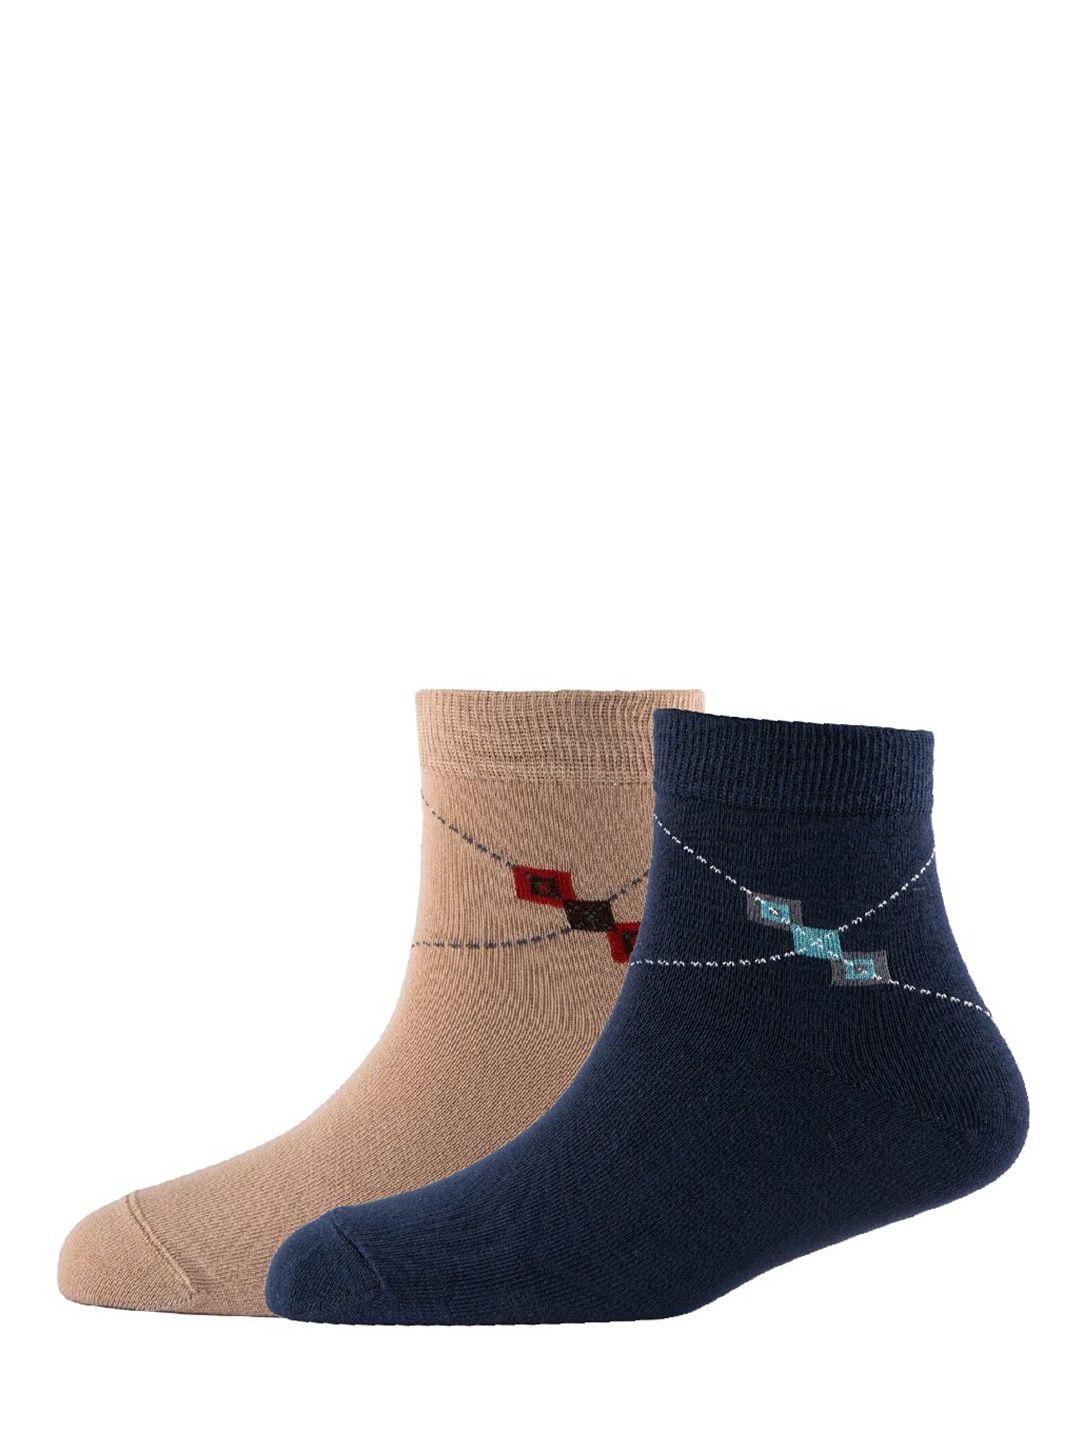 cotstyle pack of 2 patterned cotton ankle length socks